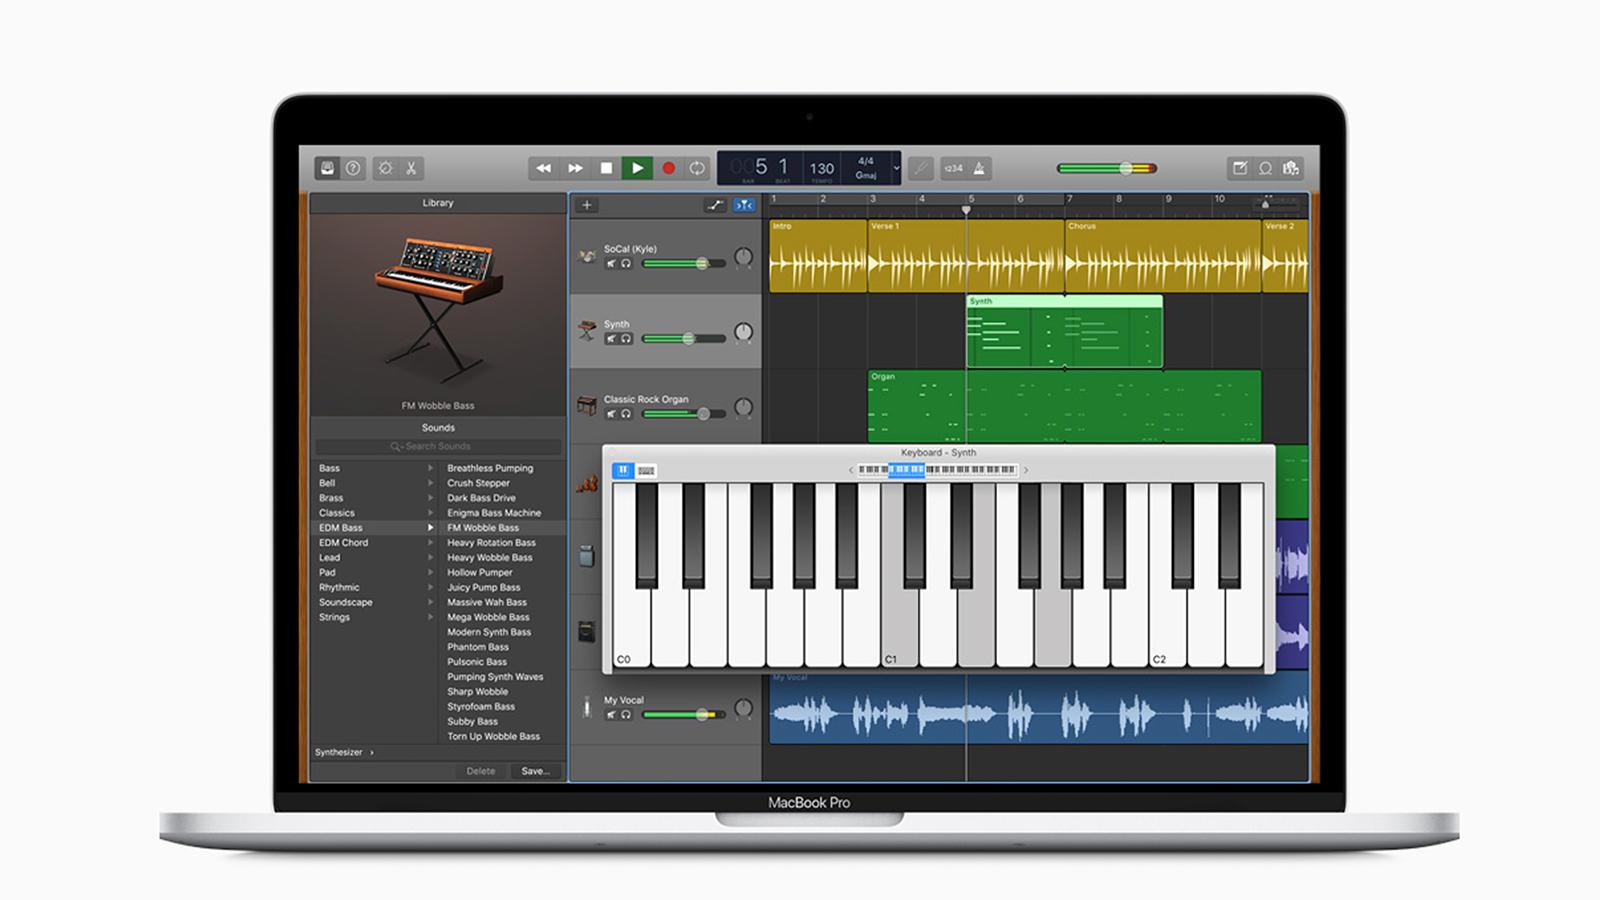 is windows or mac better for audio recording